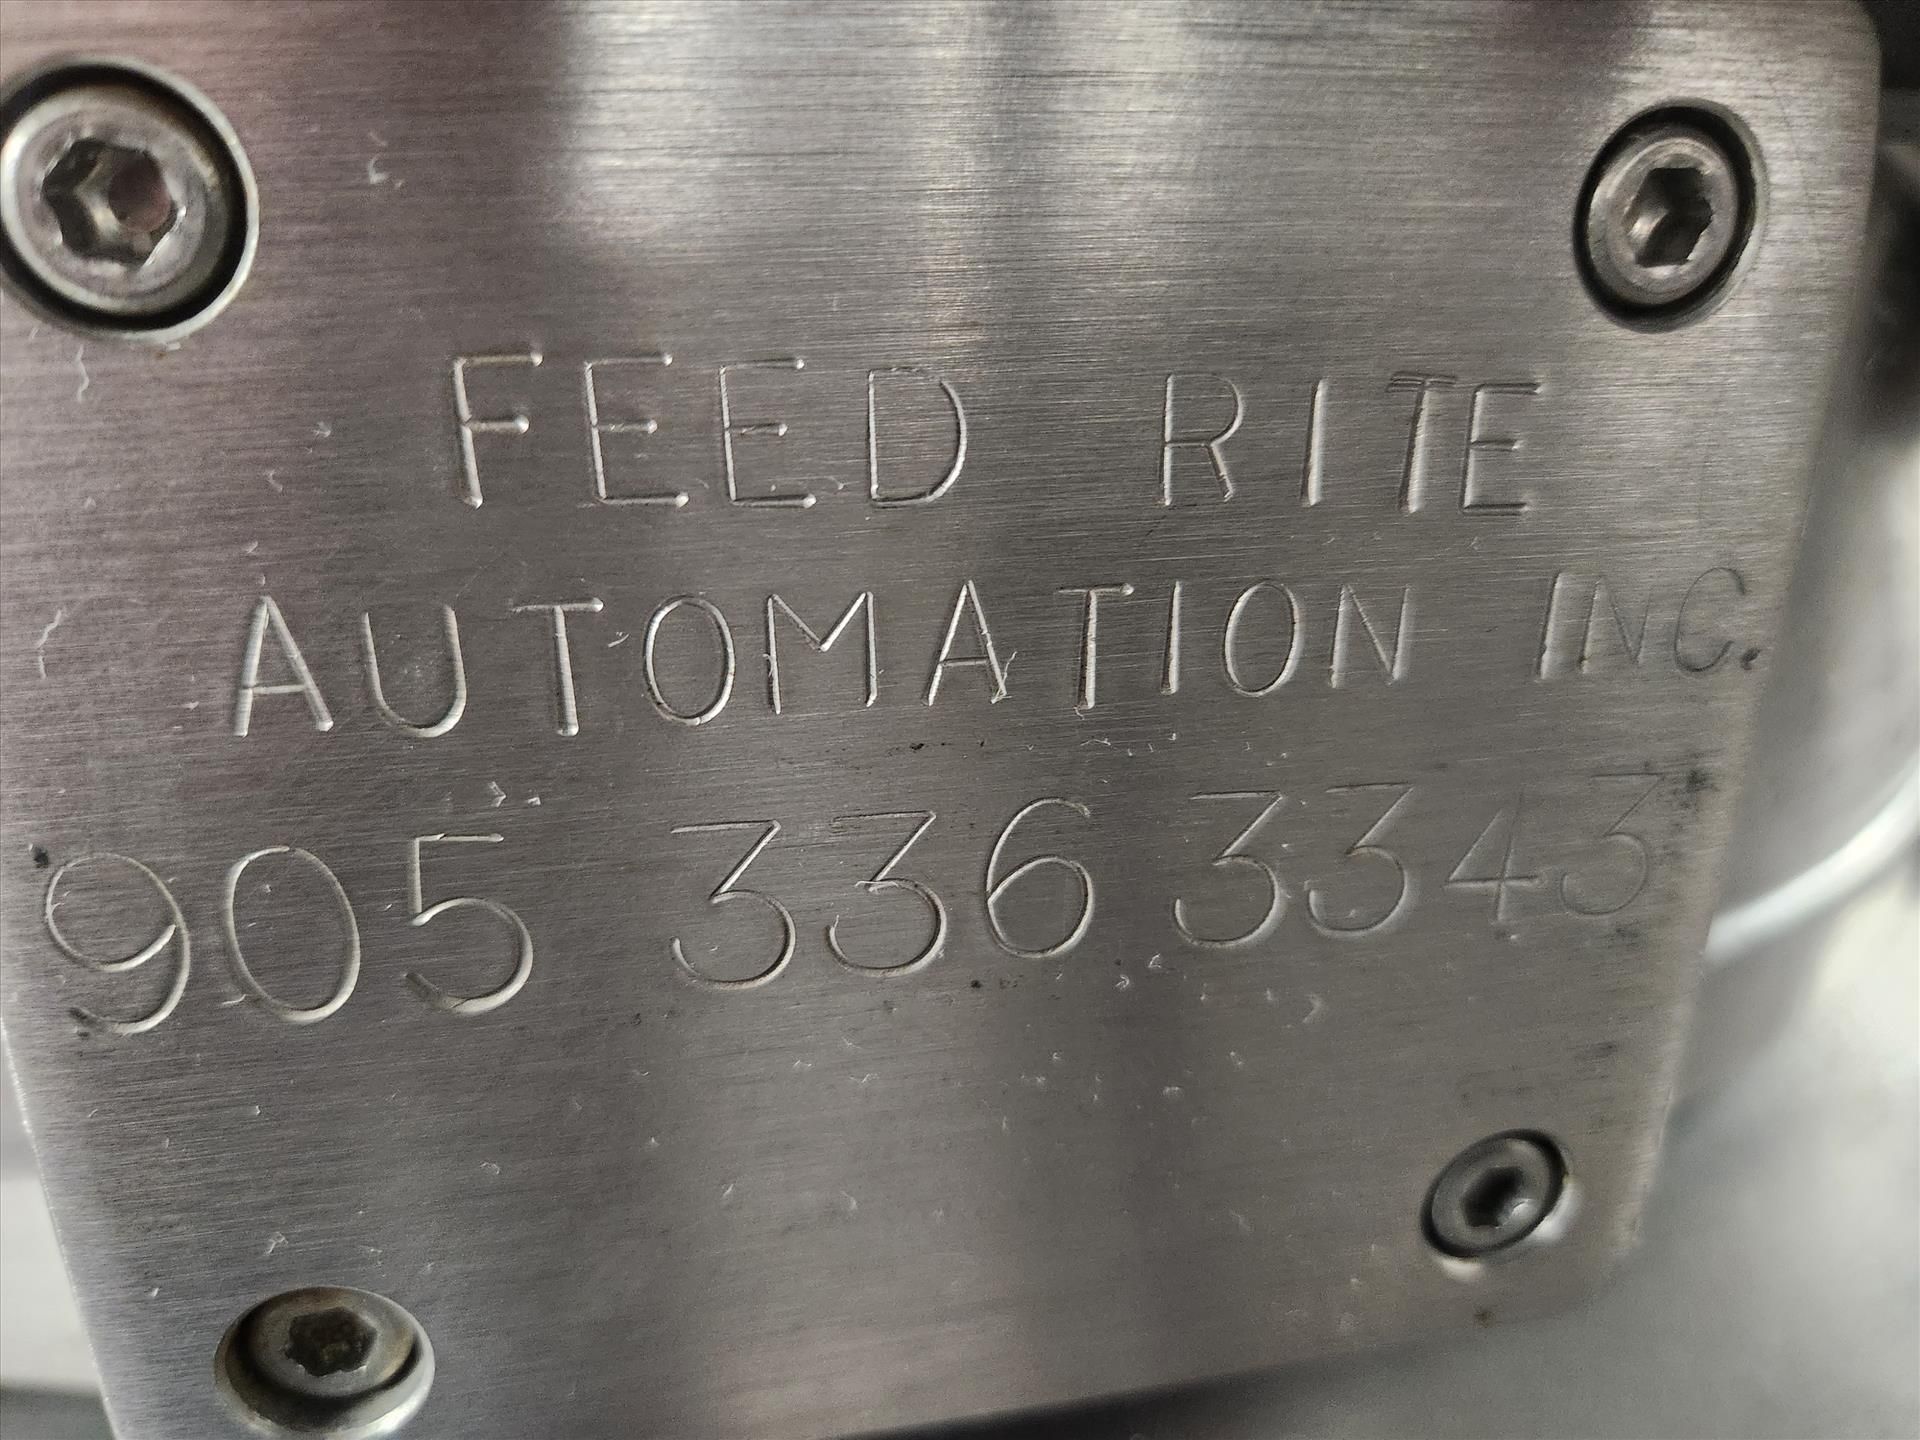 FeedRite Automation vibratory feeder, stainless steel [wall must be removed prior to removal] ( - Image 4 of 4